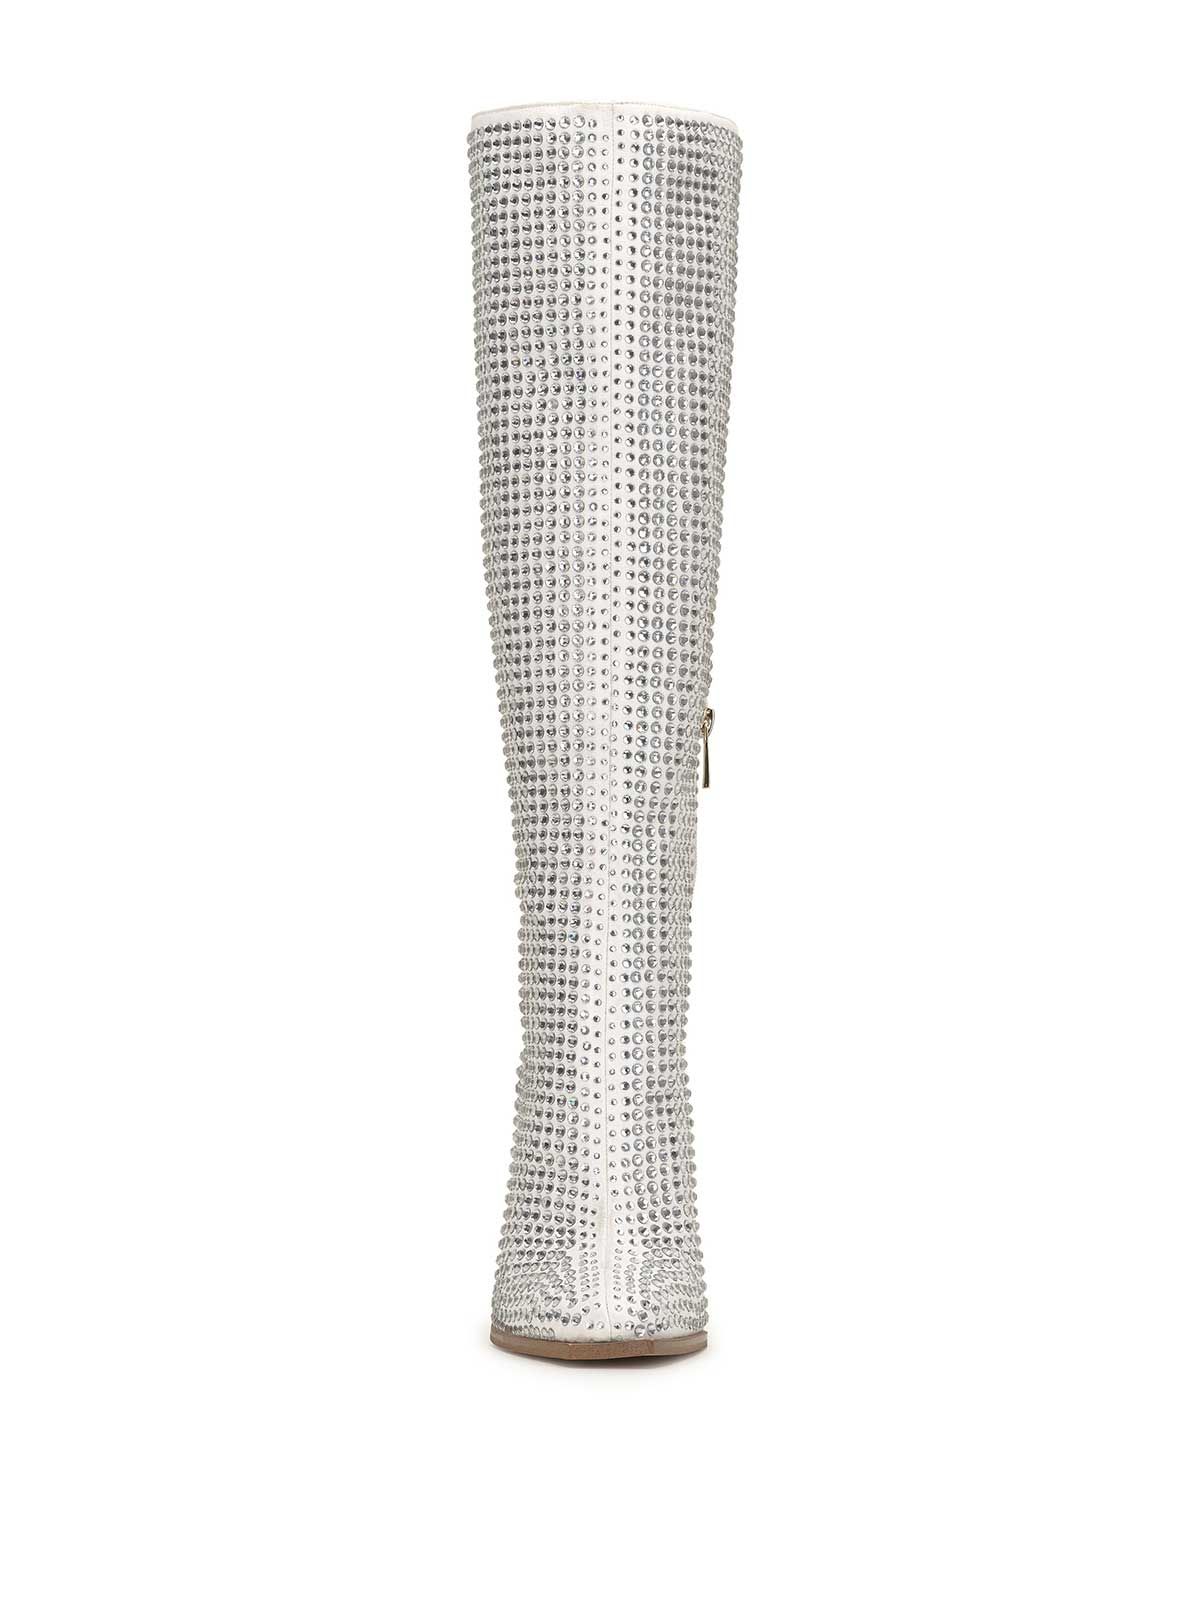 Lovelly Embellished Boot in White | Jessica Simpson E Commerce